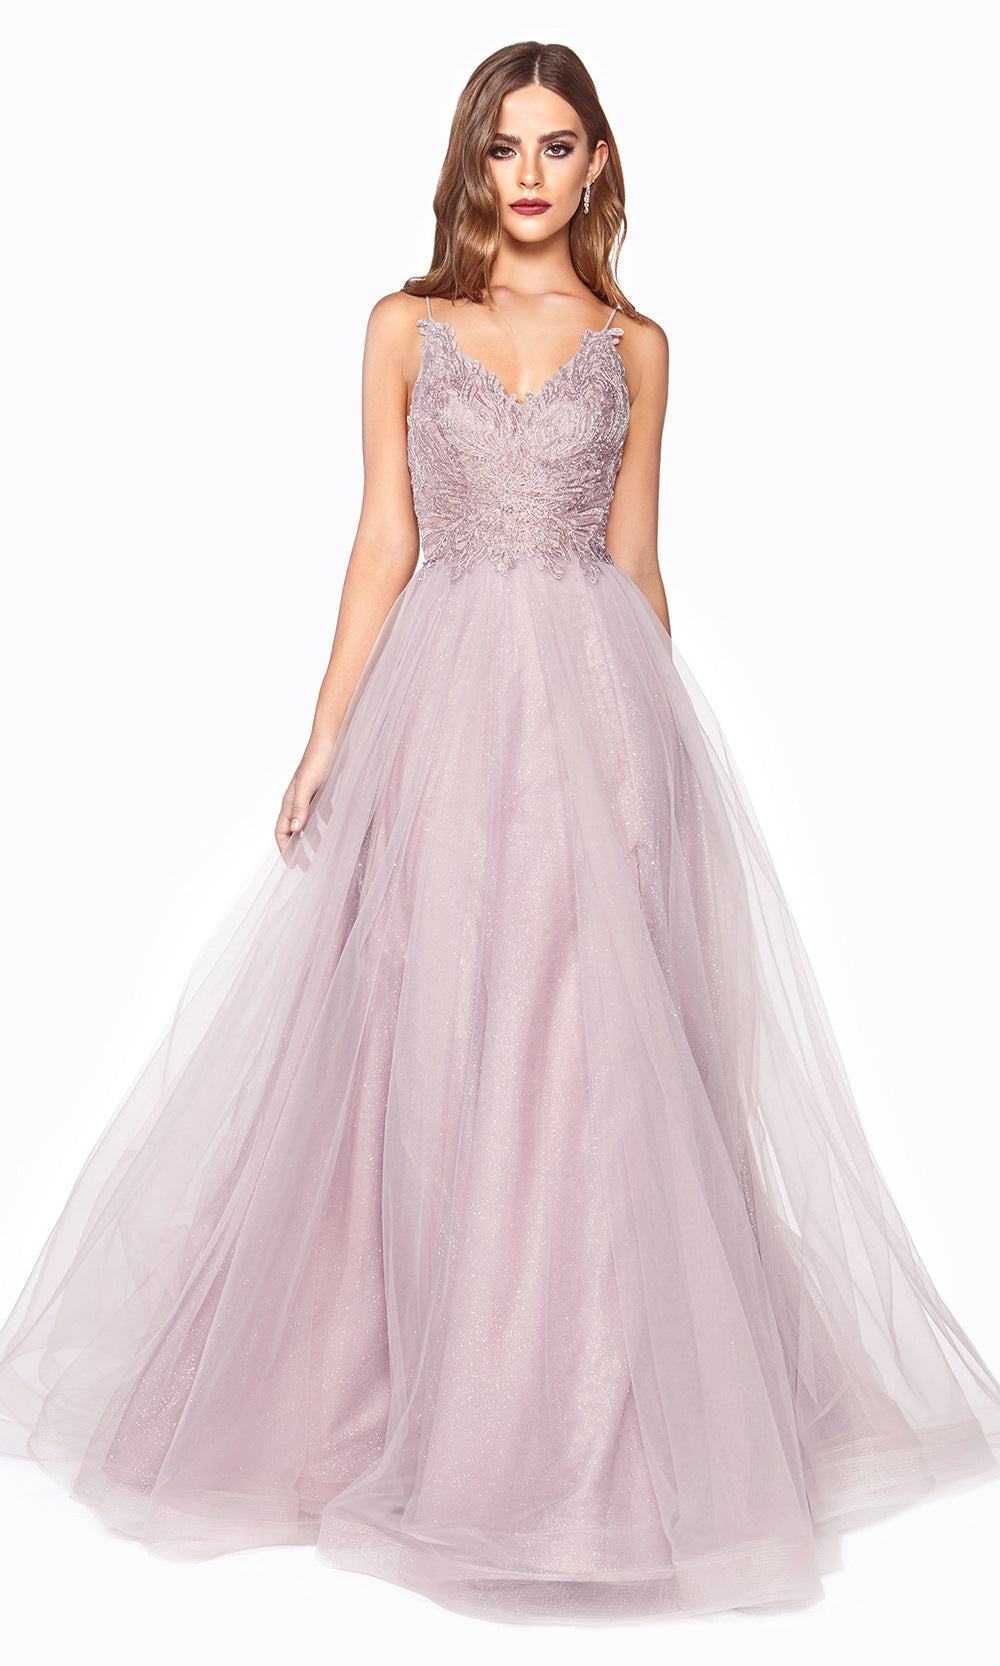 Cinderella Divine CD899 mauve v neck sequin lace beaded dress wlow back &straps. Perfect pink tulle dress for prom, wedding reception or engagement dress, indowestern gown, sweet 16, debut, quinceanera, formal party dress. Plus sizes avail